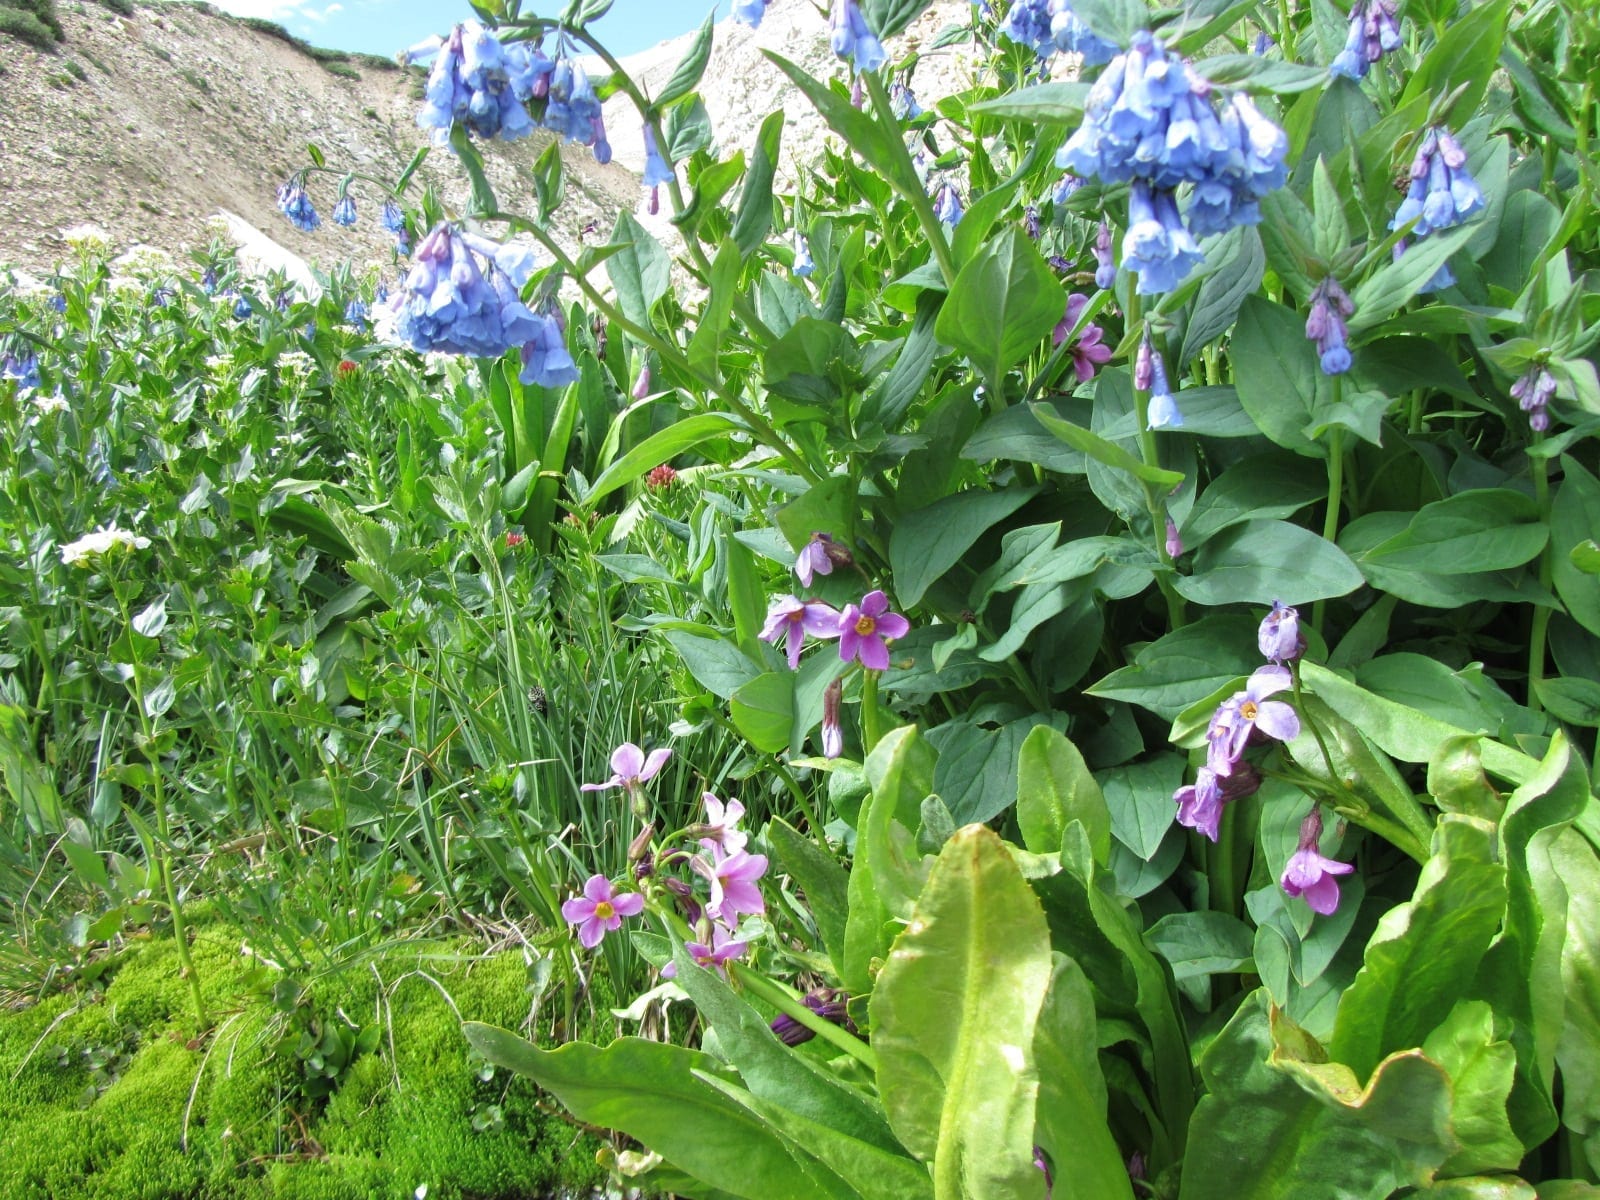 Tall Chiming Bells blooming by an alpine creek